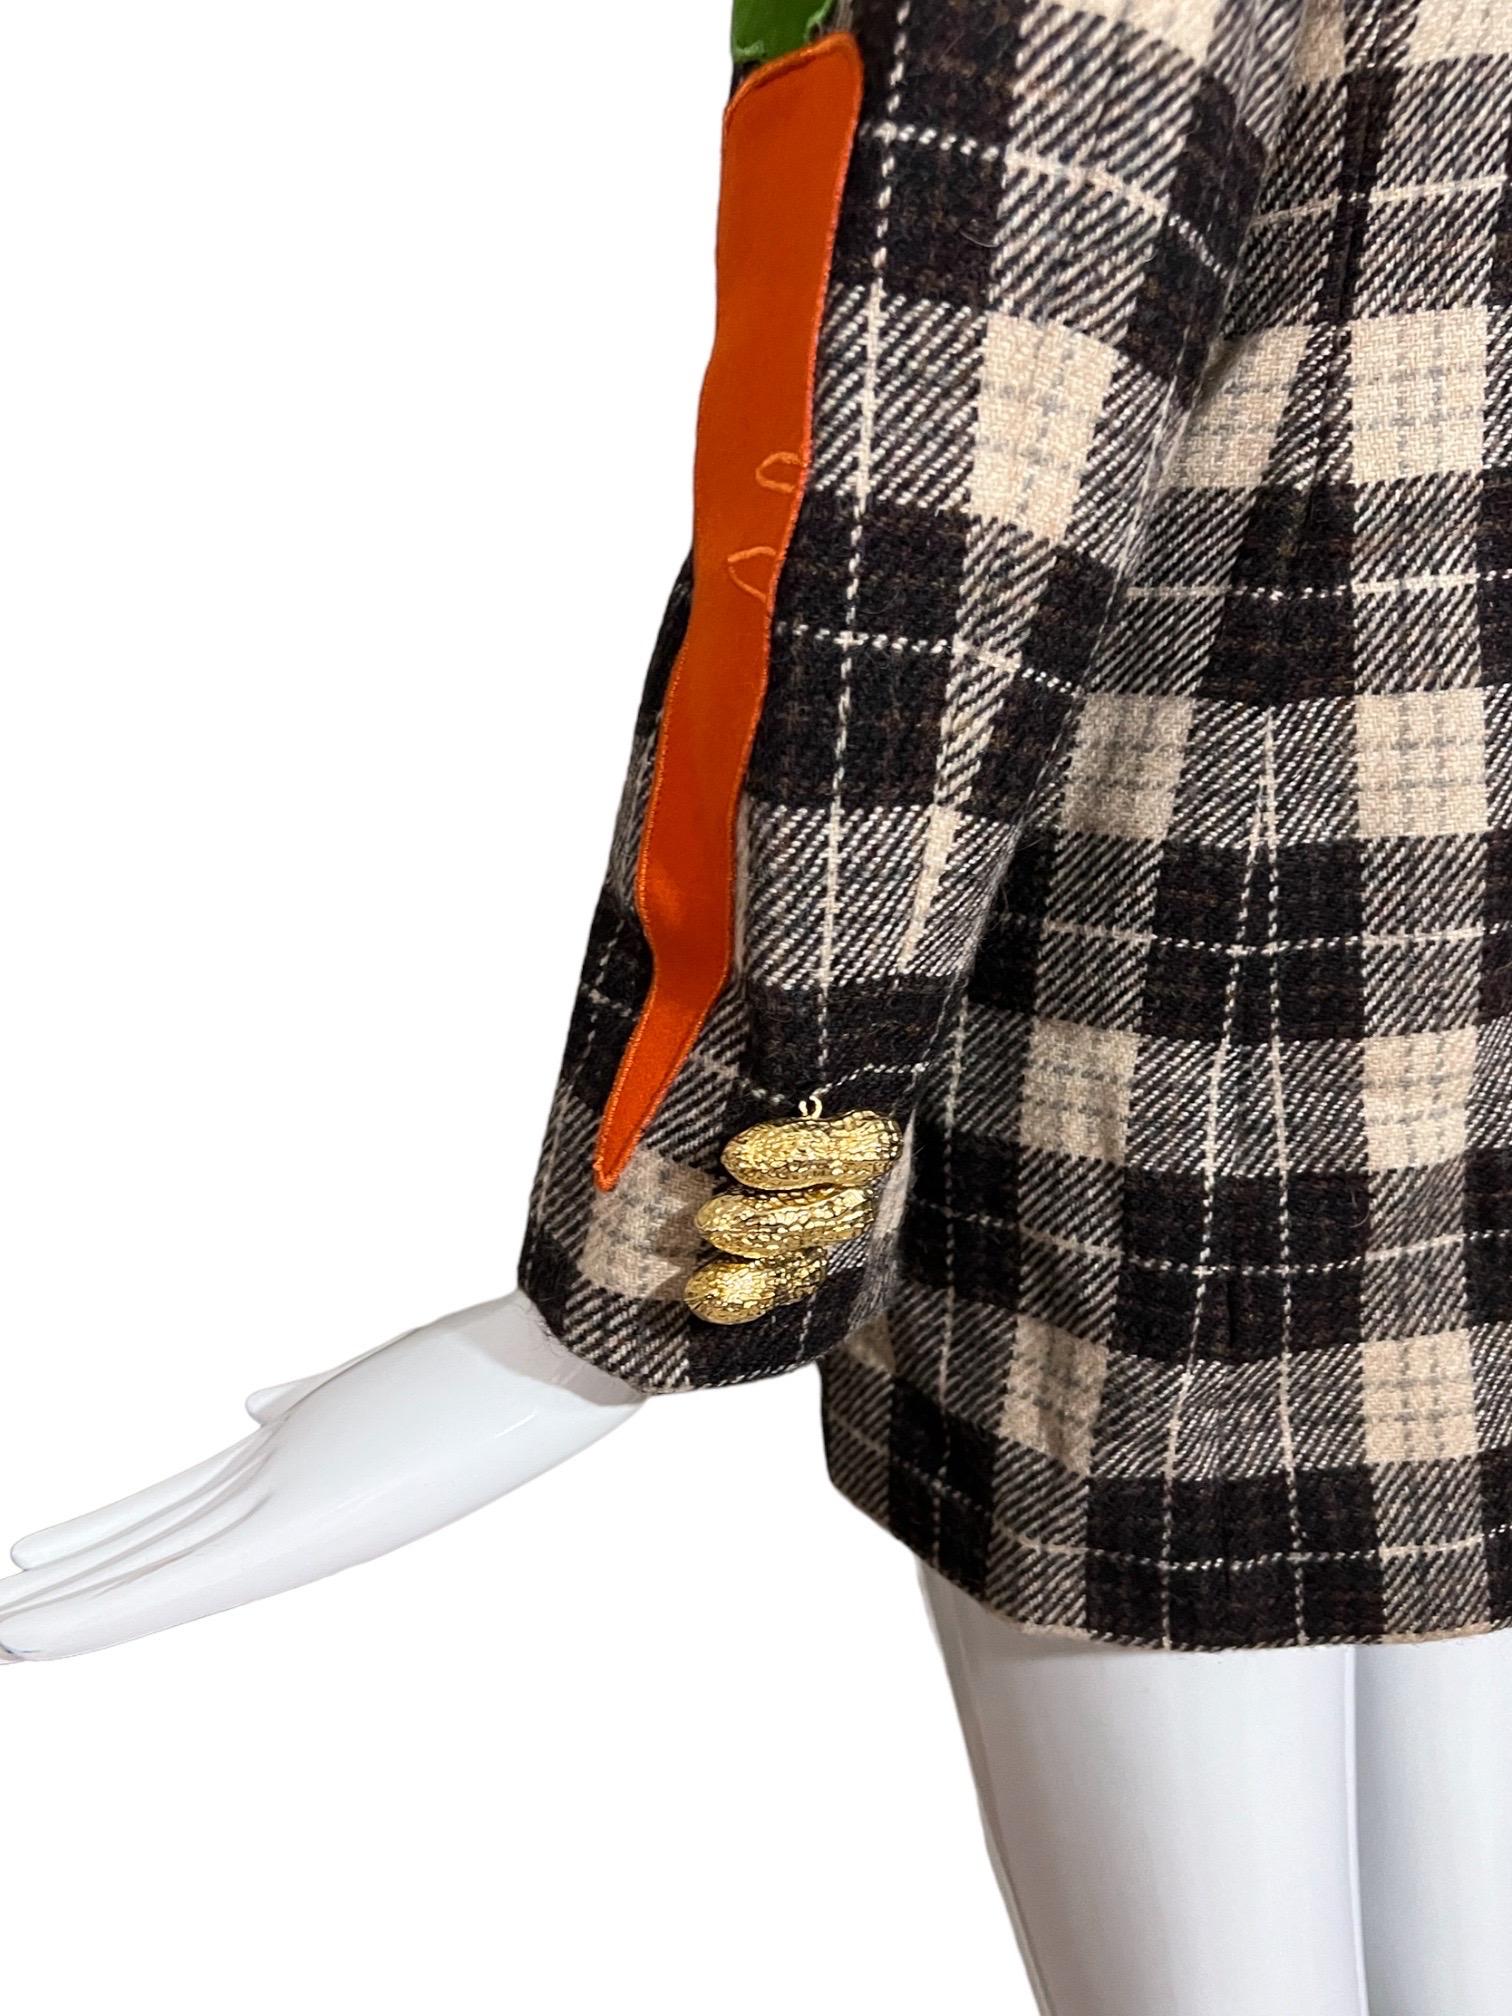 Moschino Cheap & Chic Vintage Vegetable Jacket as seen on the Nanny 4